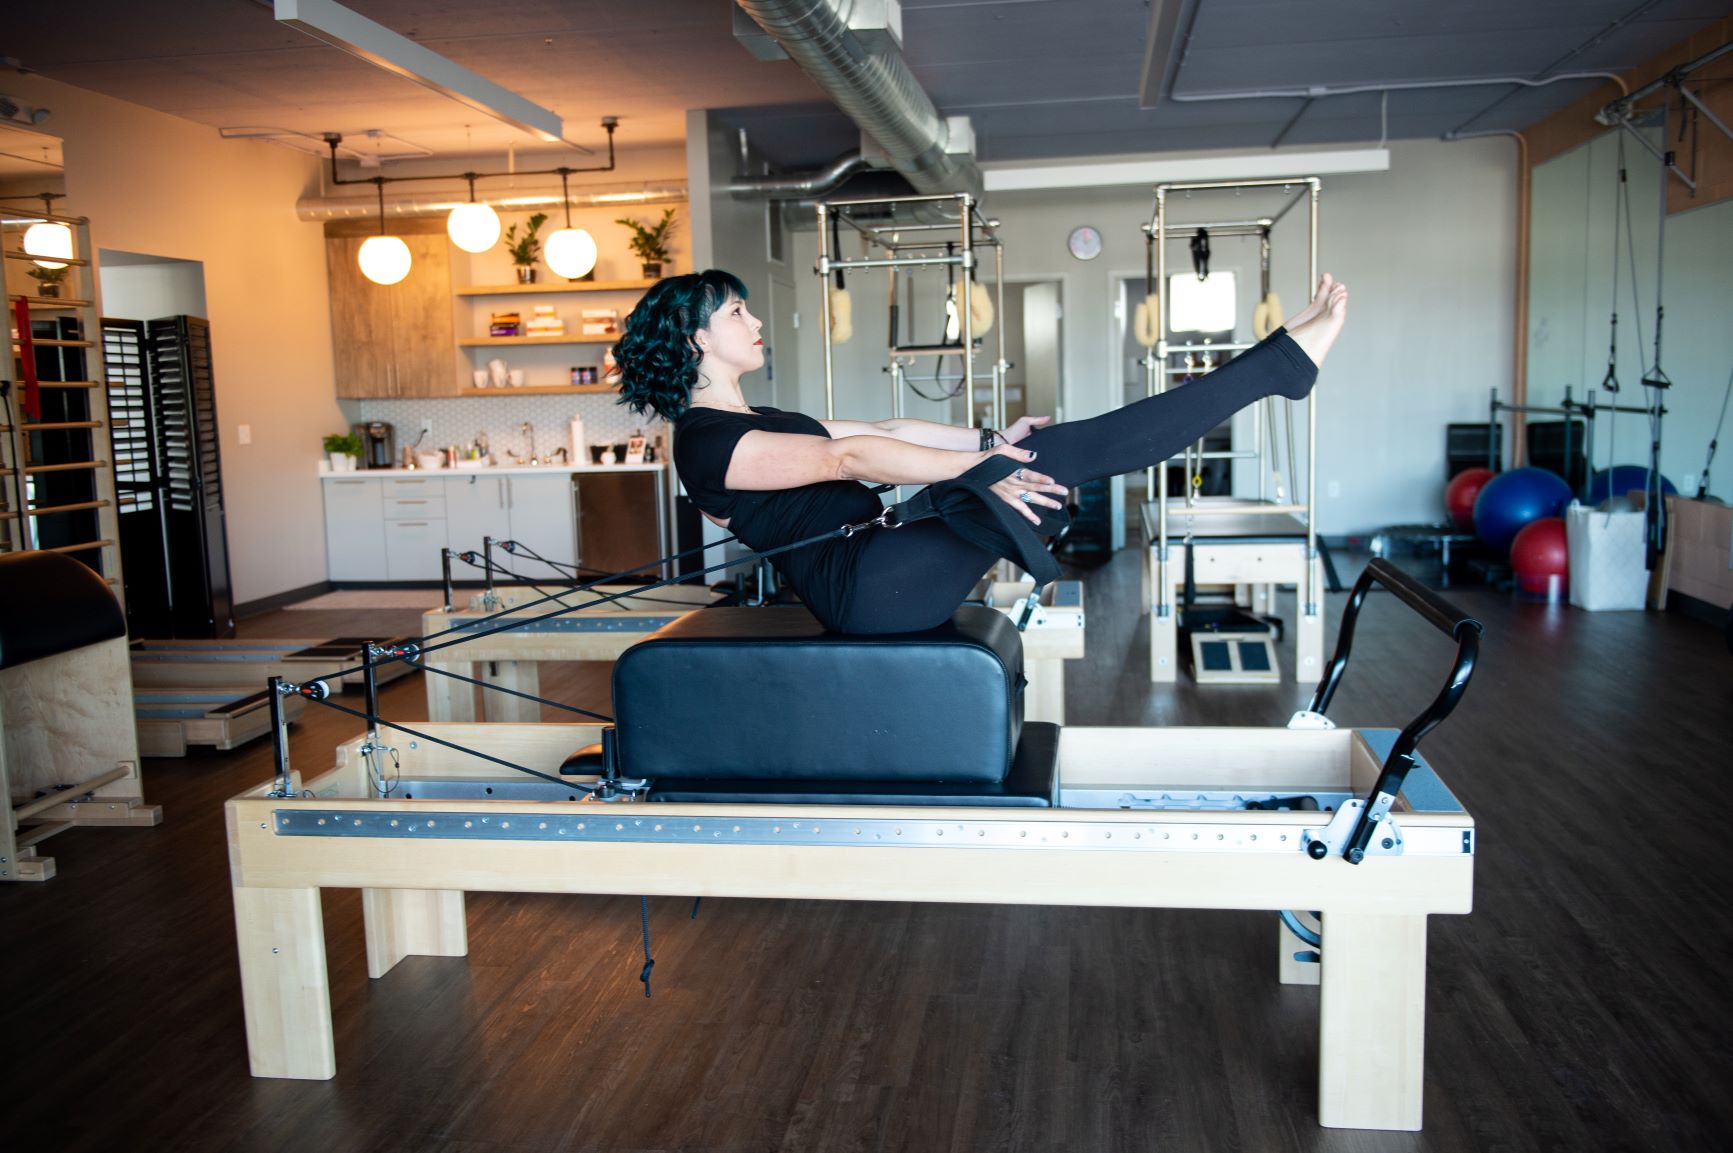 Pilates offers strength, flexibility and balance in a low impact exercise.